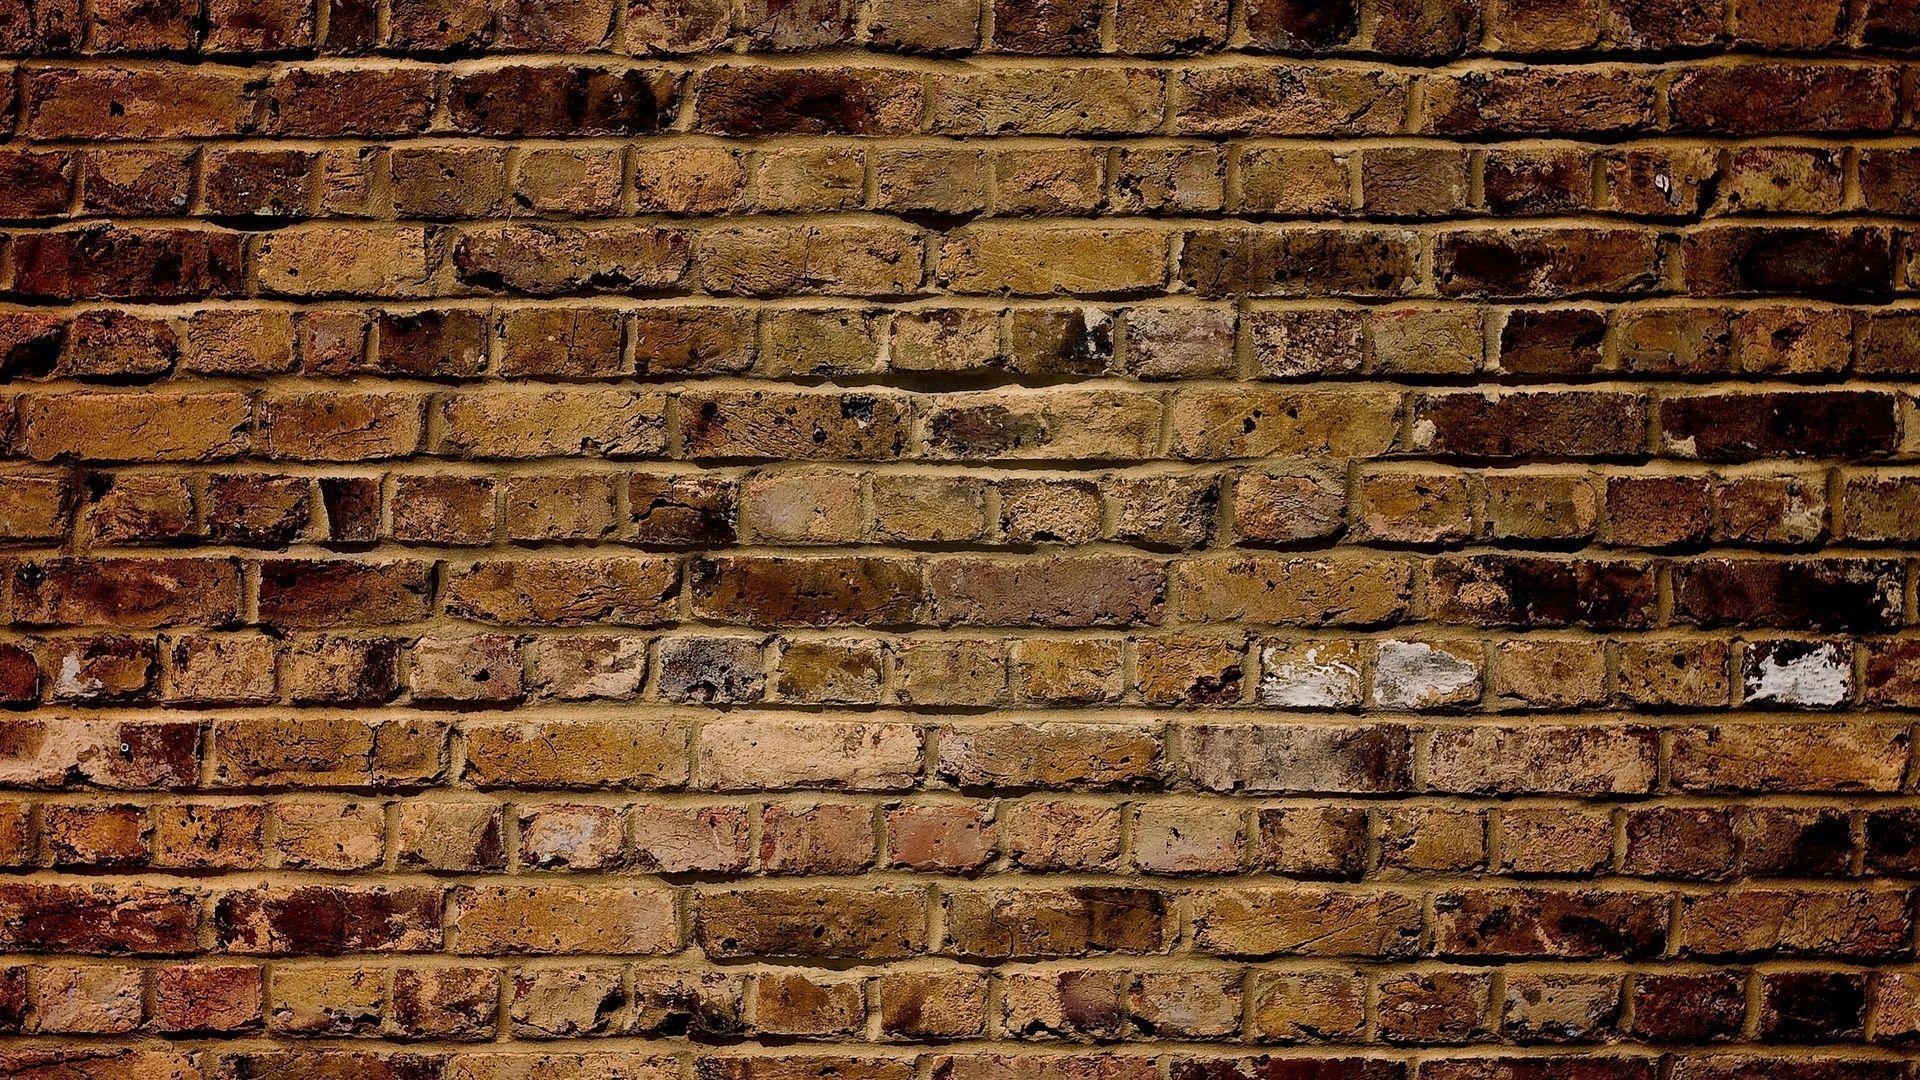 500 Brick Wall Pictures  Images HD  Download Free Photos on Unsplash